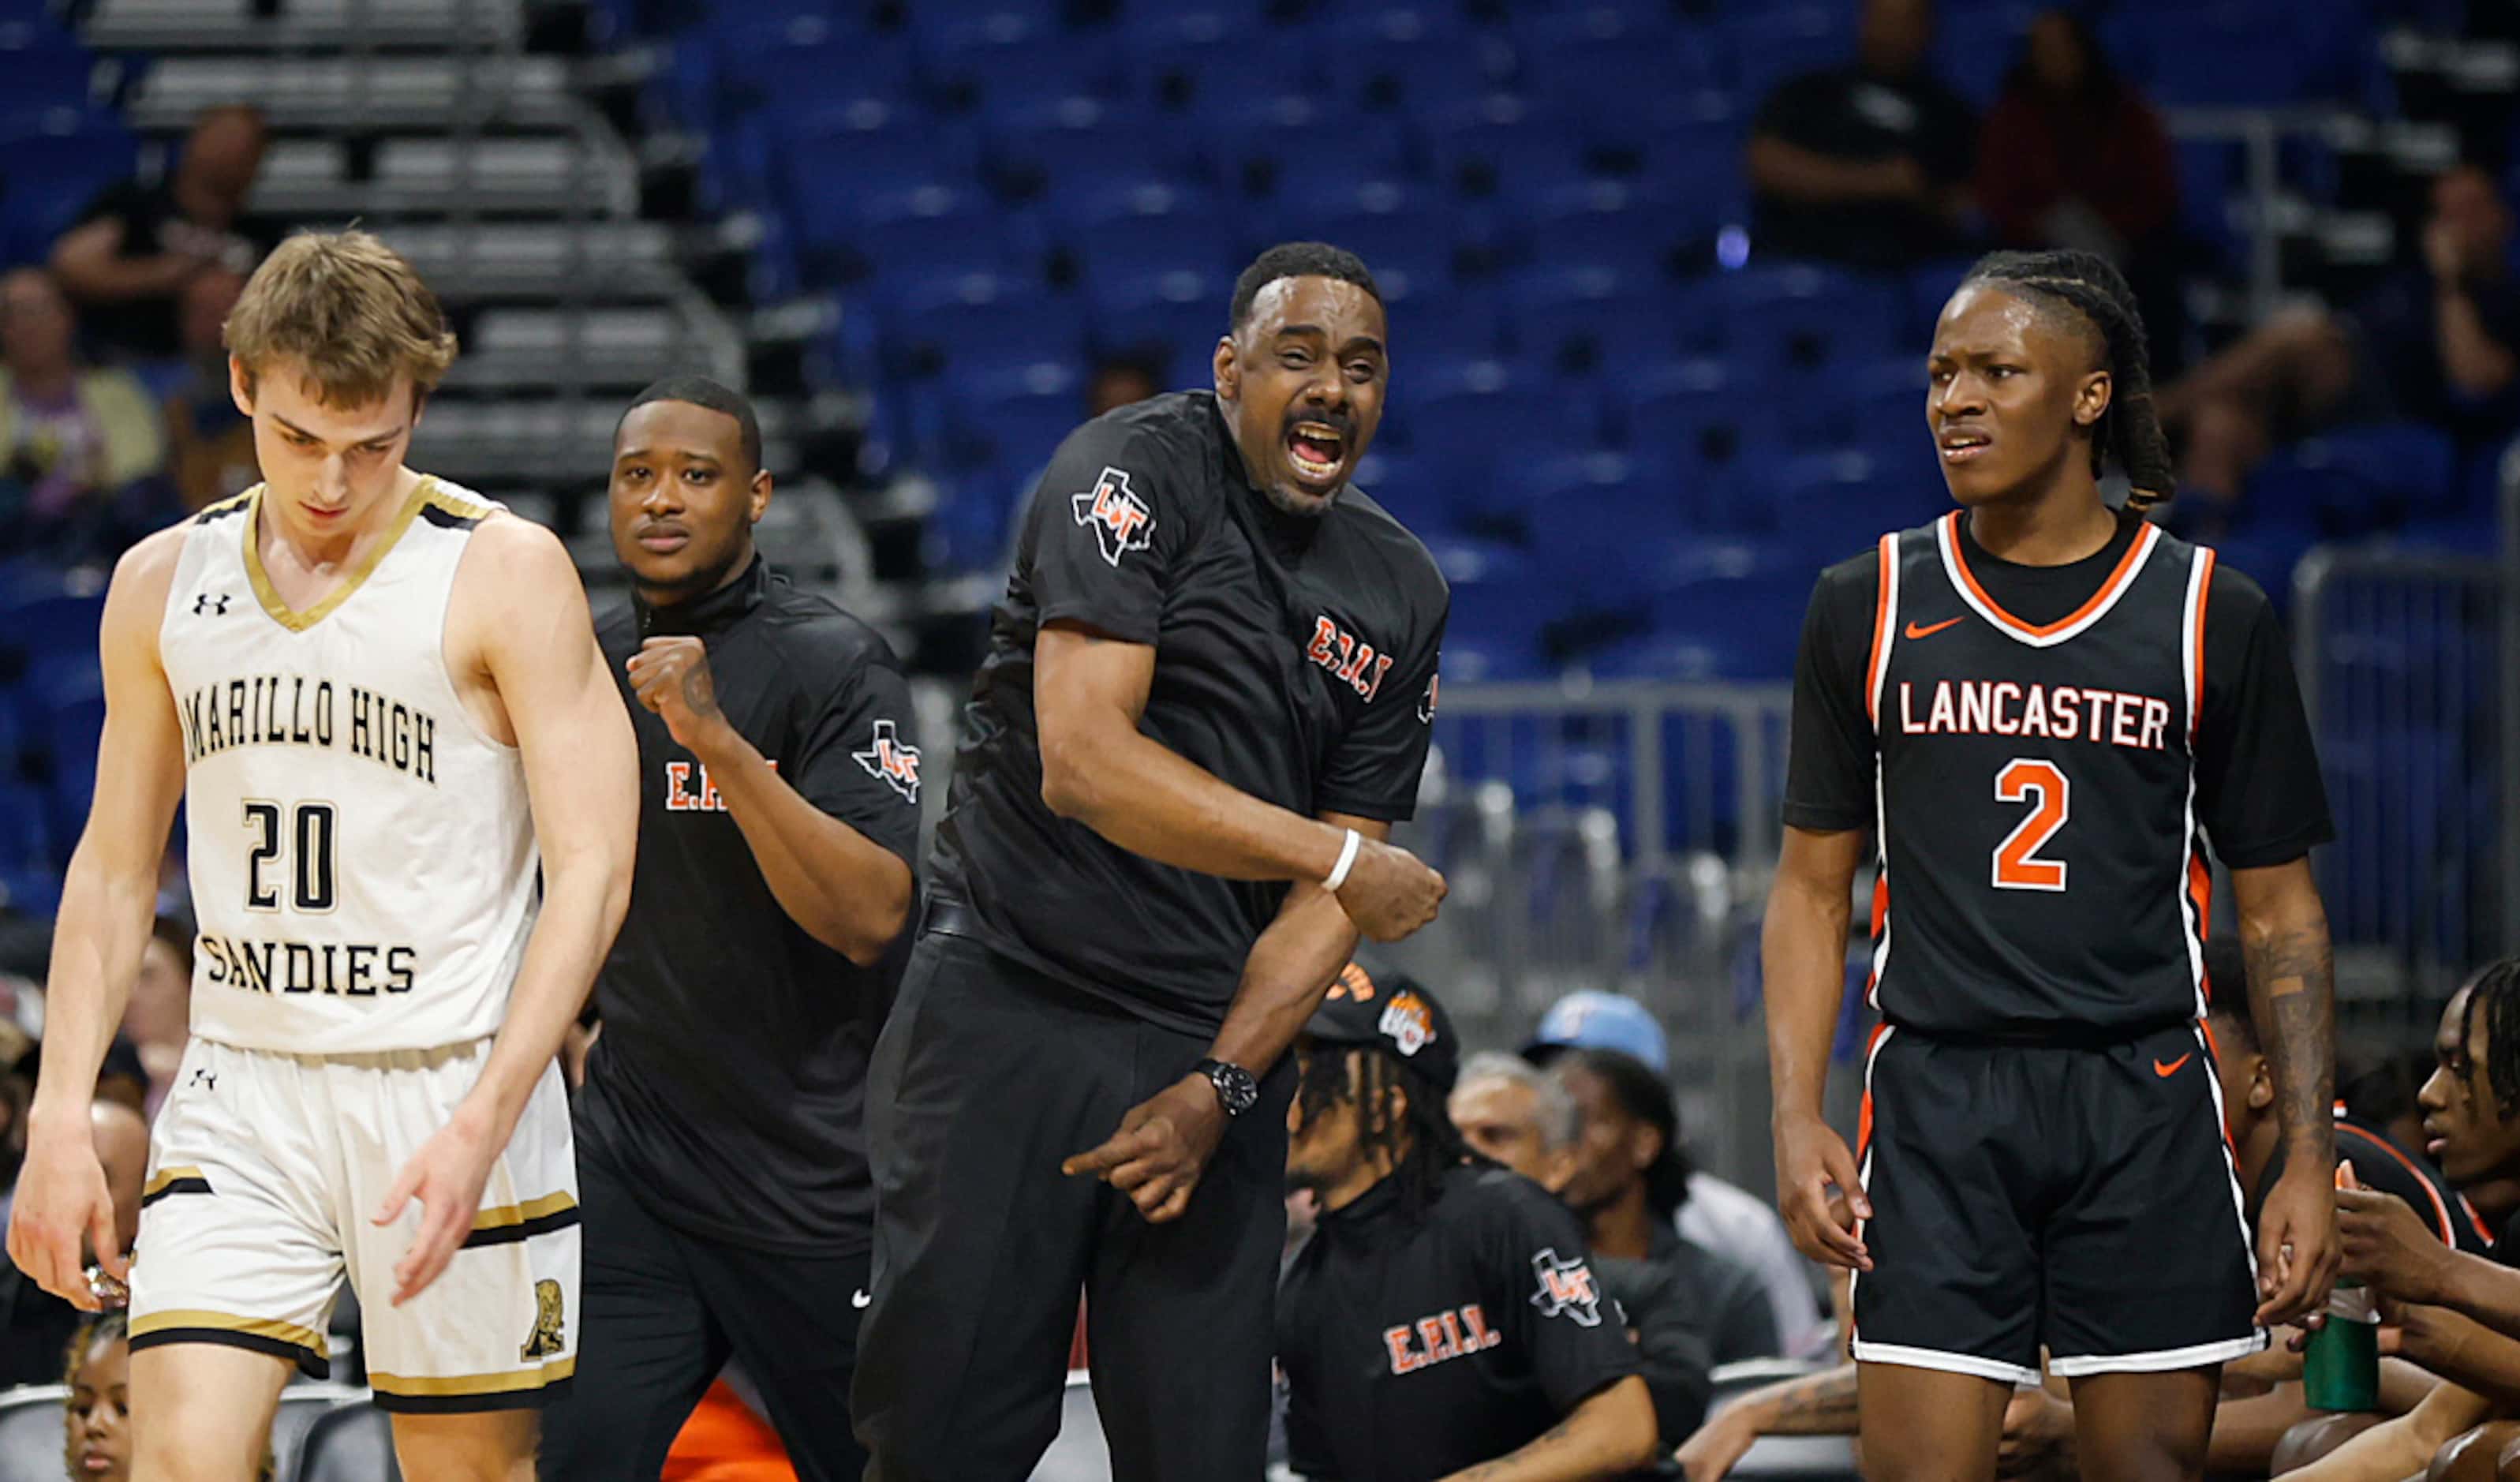 Lancaster head coach Ferrin Douglas reacts after an Amarillo turnover in the first half of a...